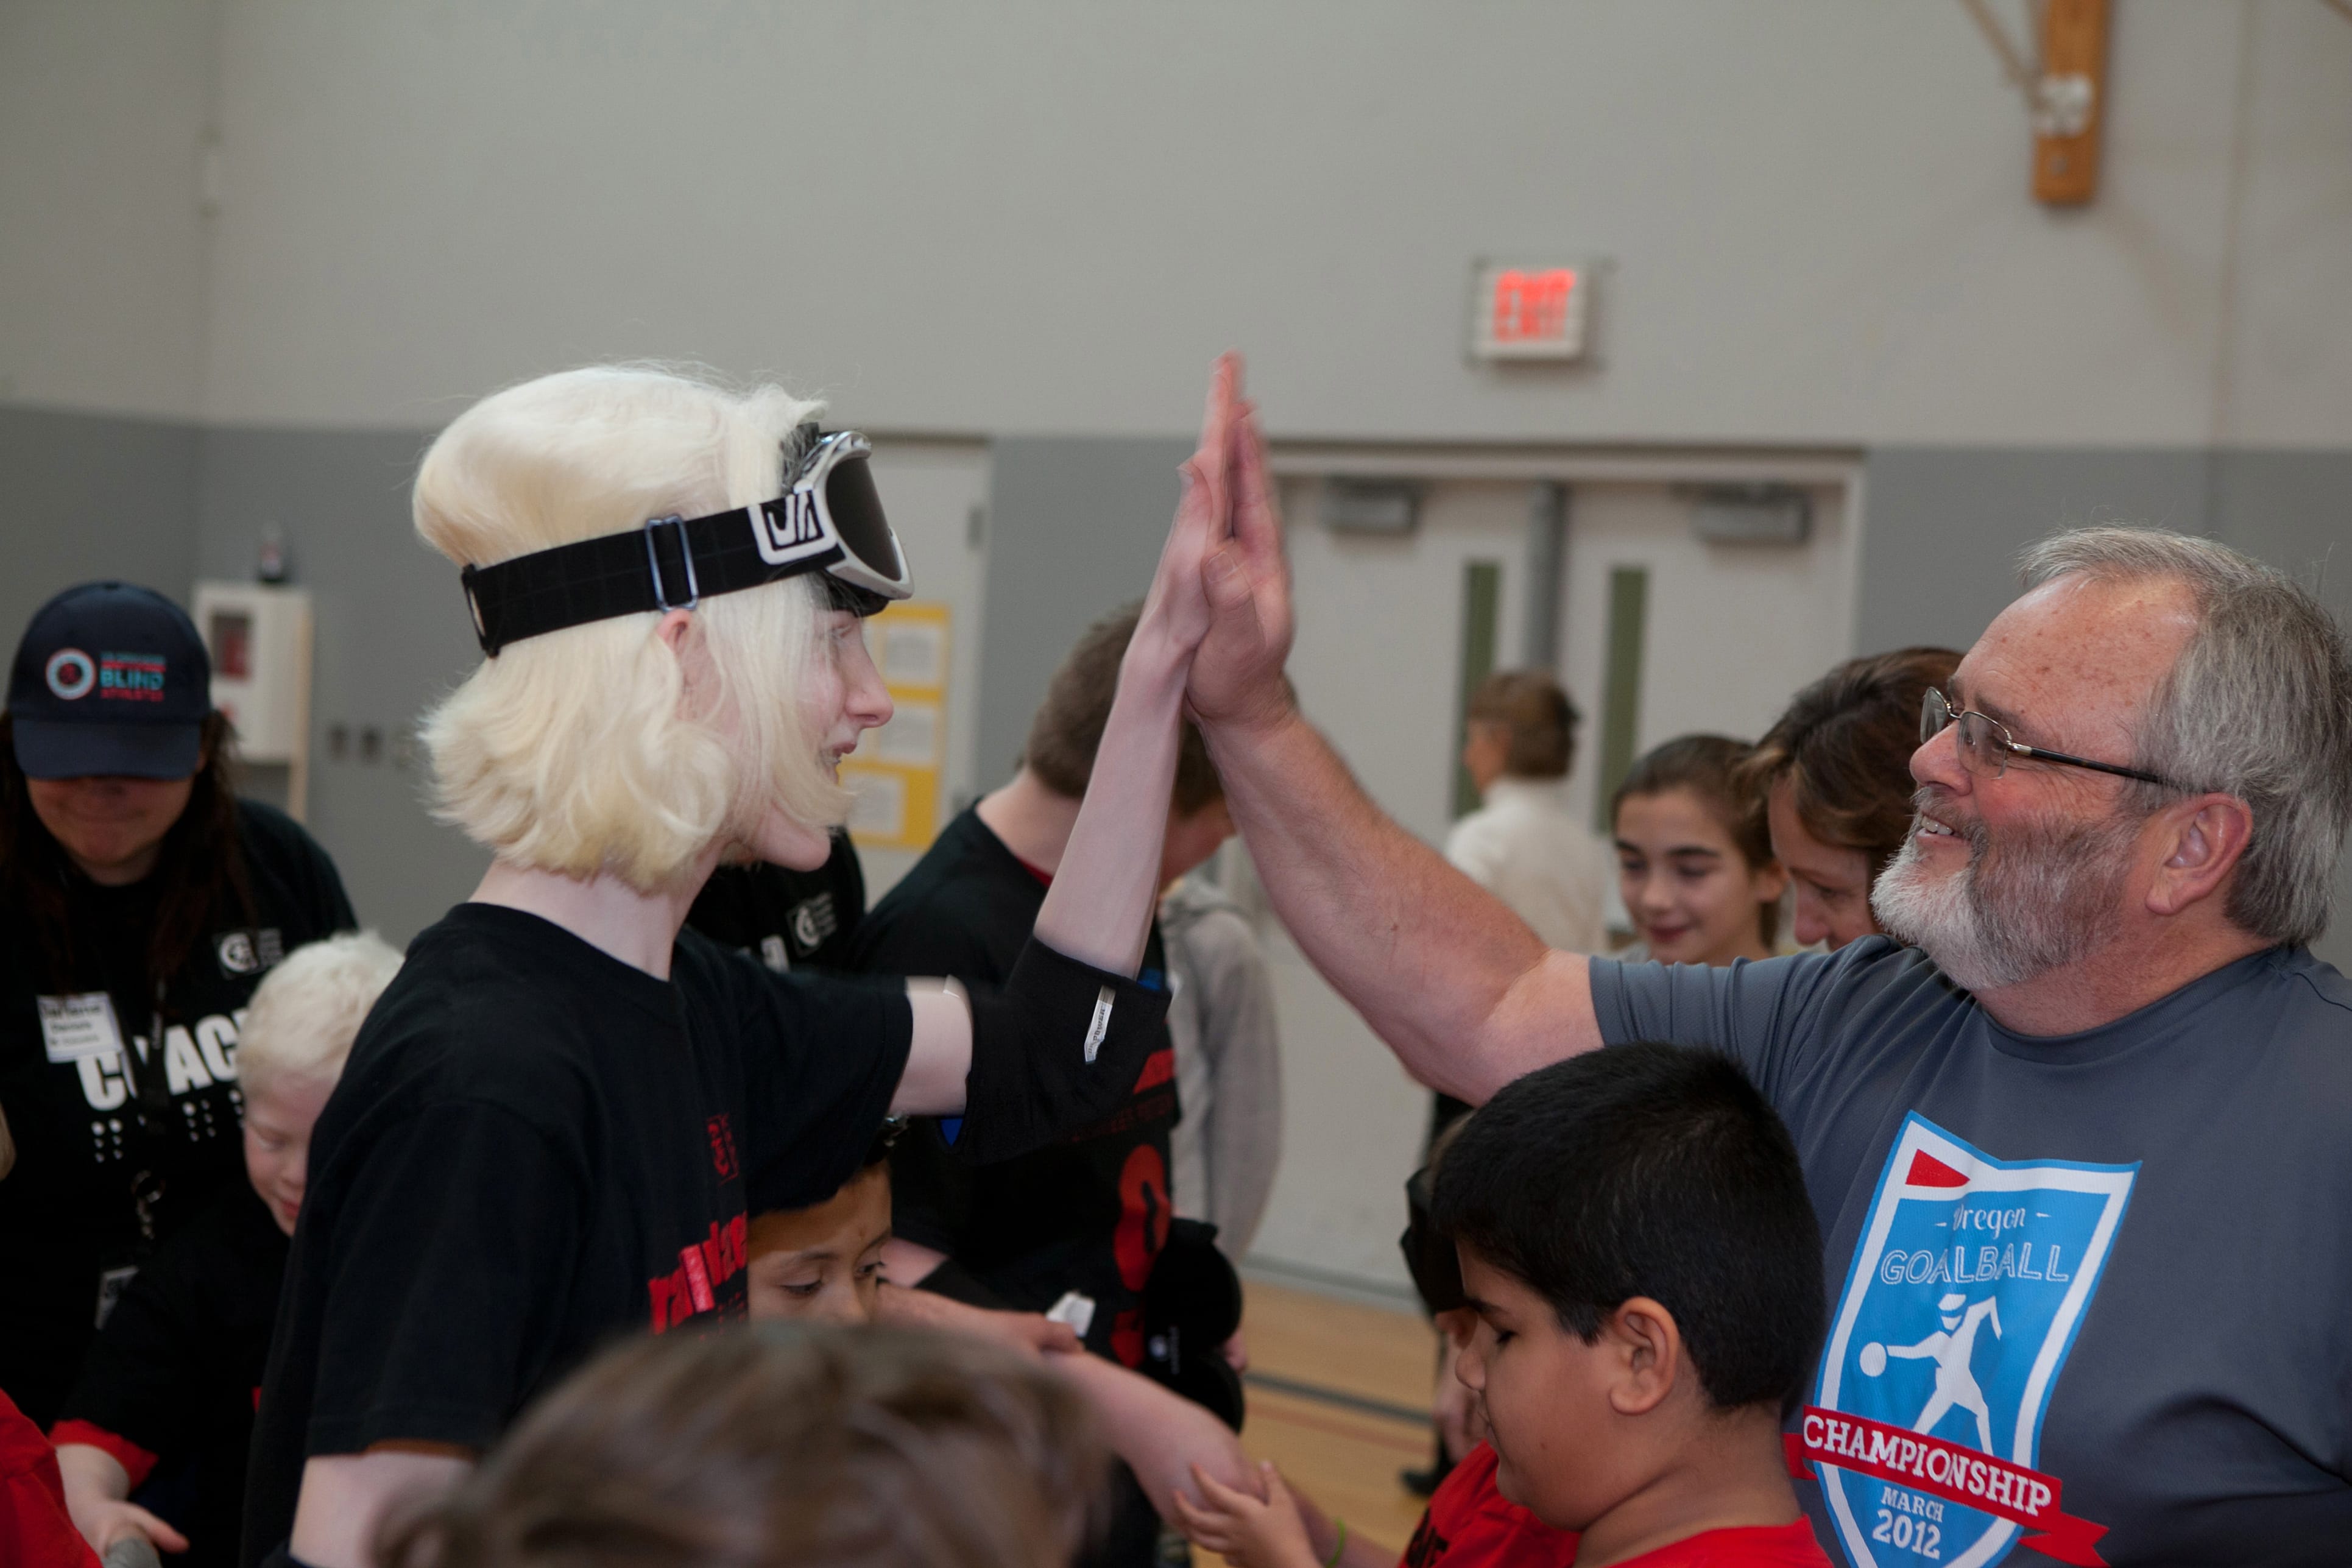 A student celebrates with a volunteer after participating in a Northwest Association of Blind Athletes goalball tournament in March, in Canby, Ore. &quot;It is a game that requires superb hearing skills, excellent reflexes and superb mental concentration,&quot; said Billy Henry, co-founder of the NWABA.